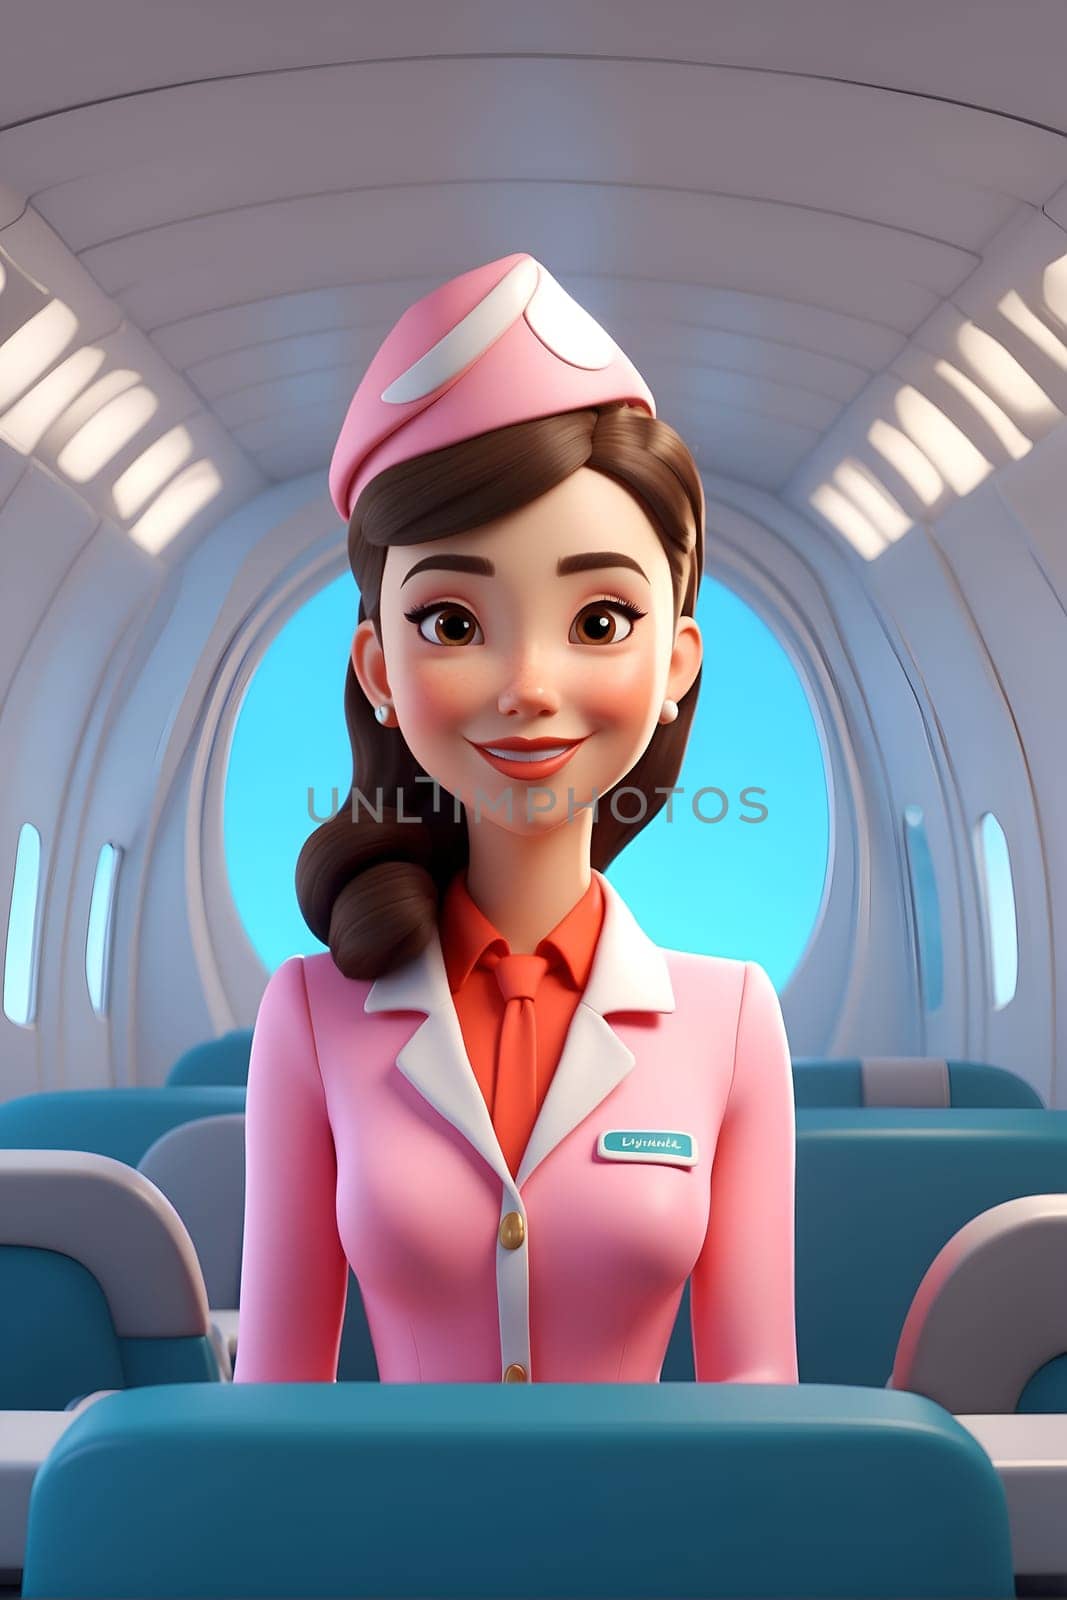 A woman in a pink uniform stands inside an airplane, ready for her duties.